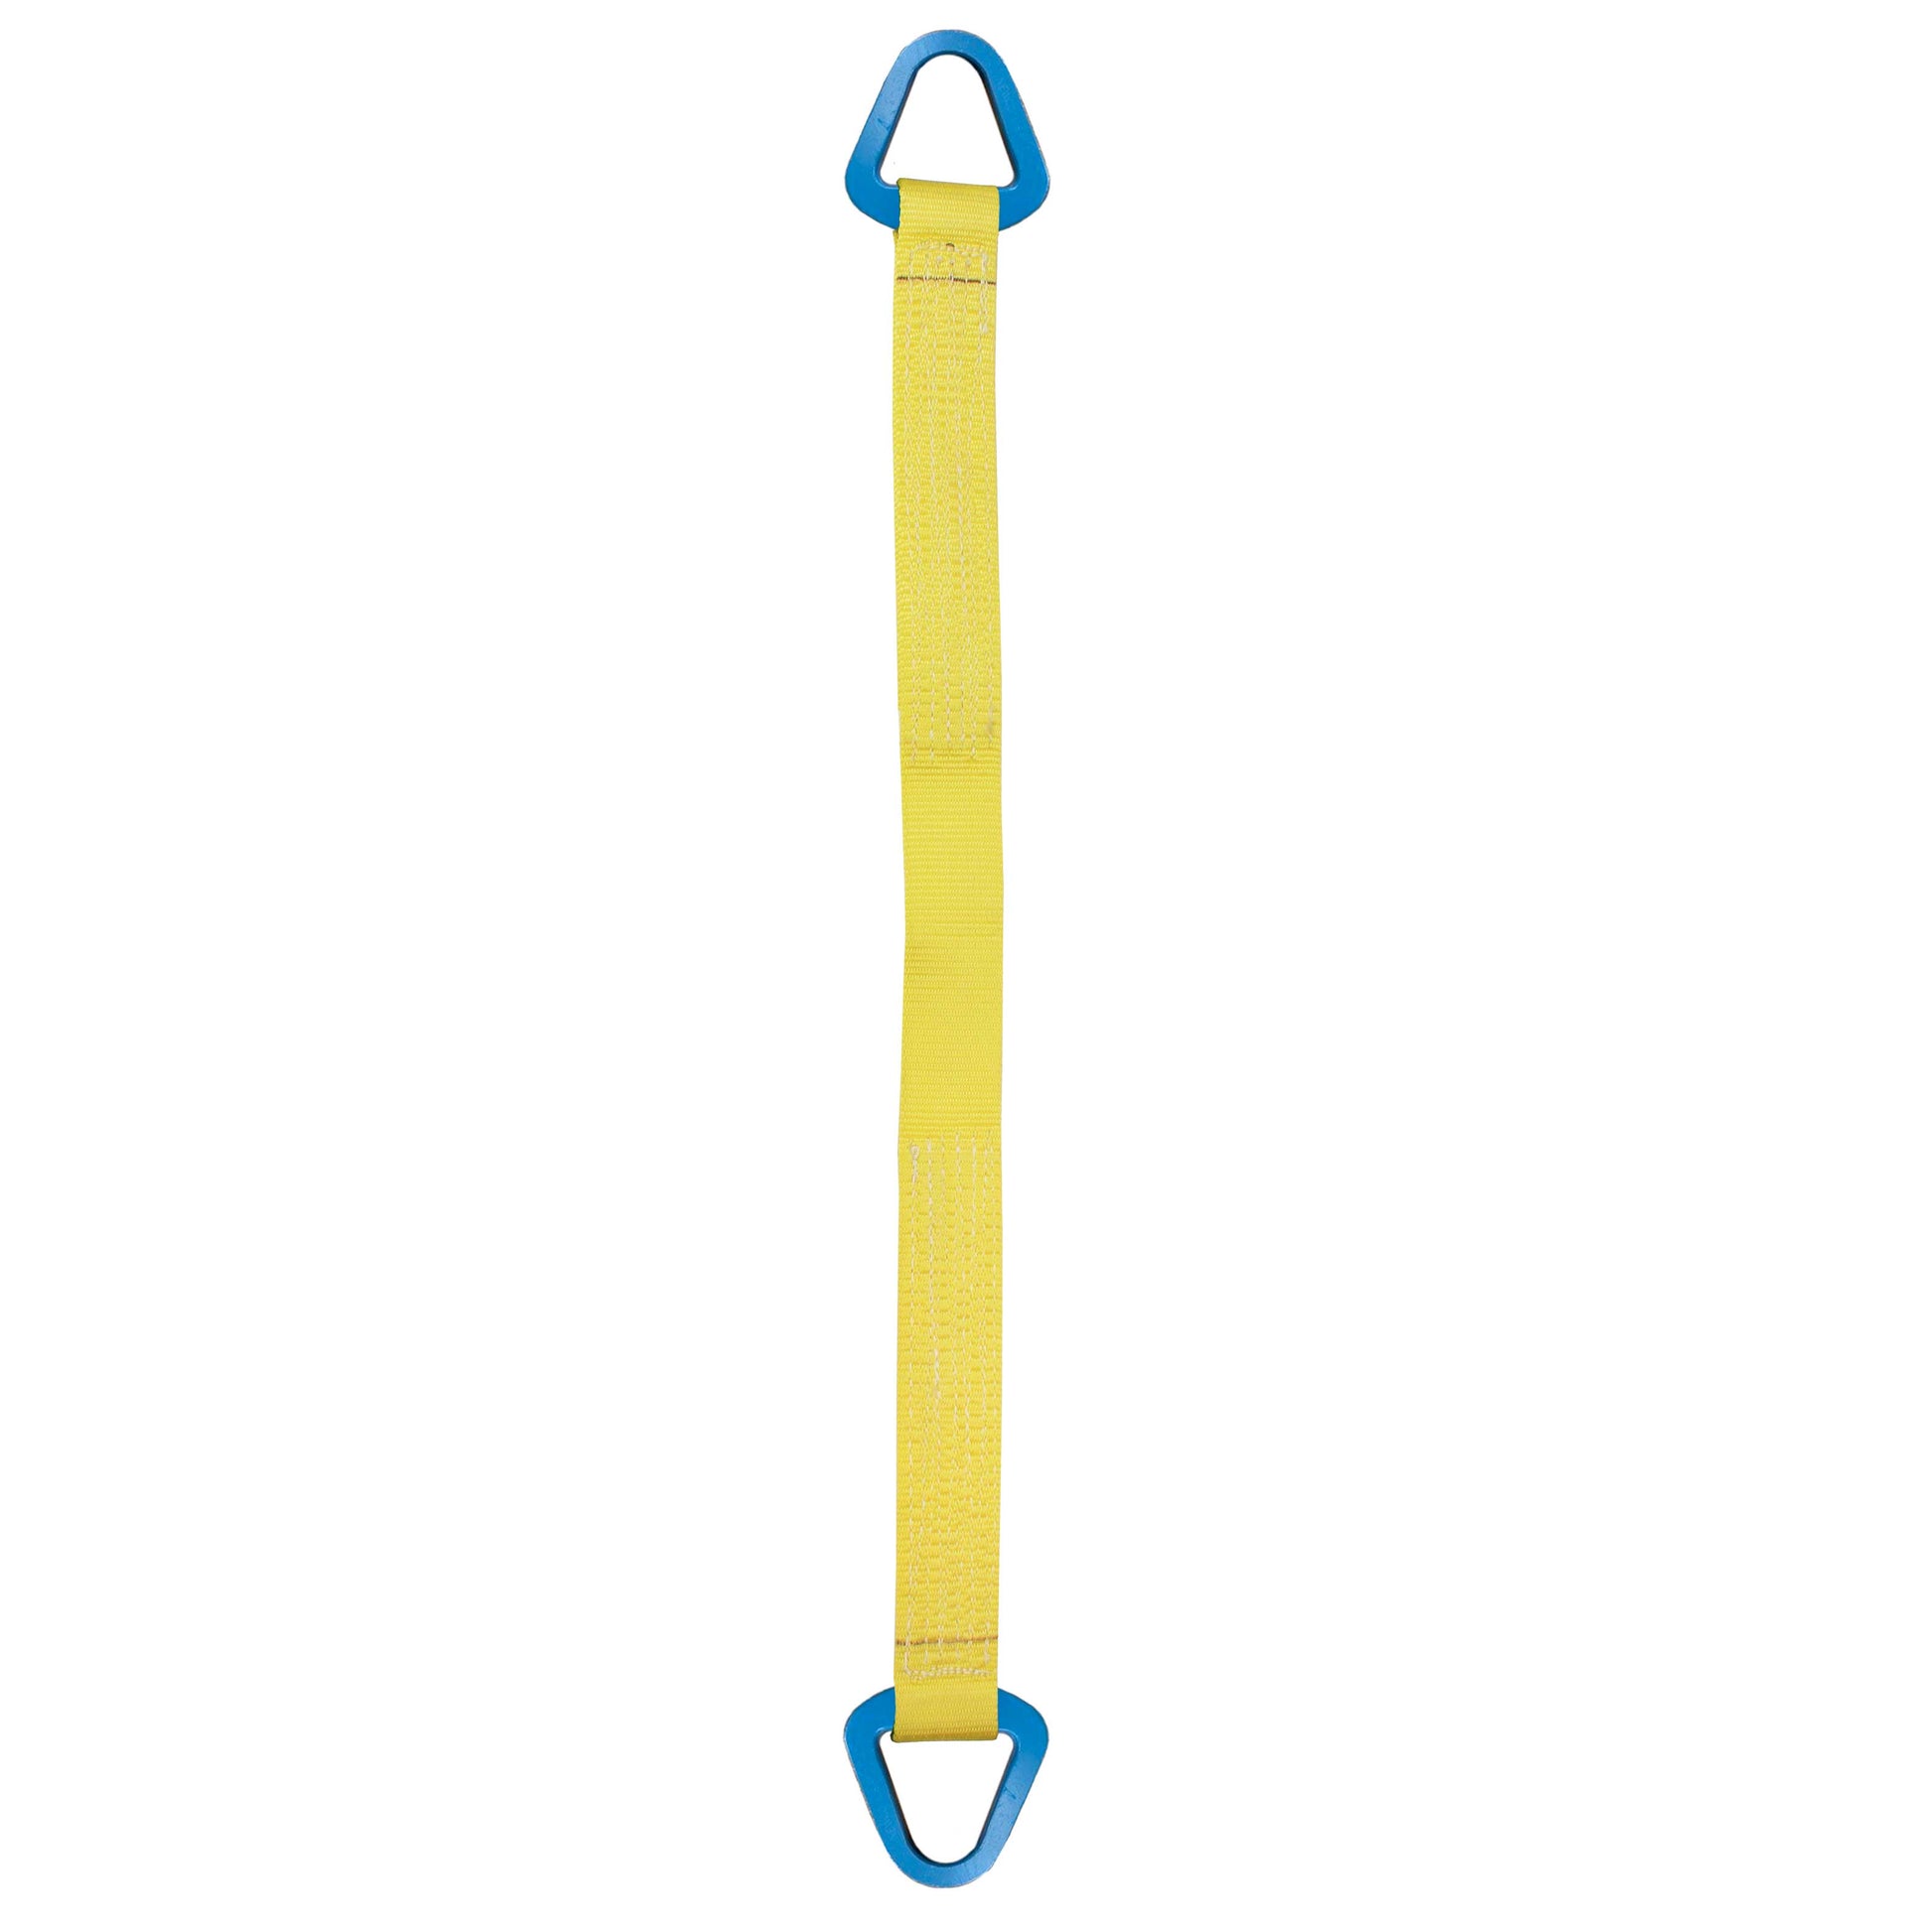 Nylon Lifting Sling Triangle 10 inch x 16 foot 1ply image 1 of 2